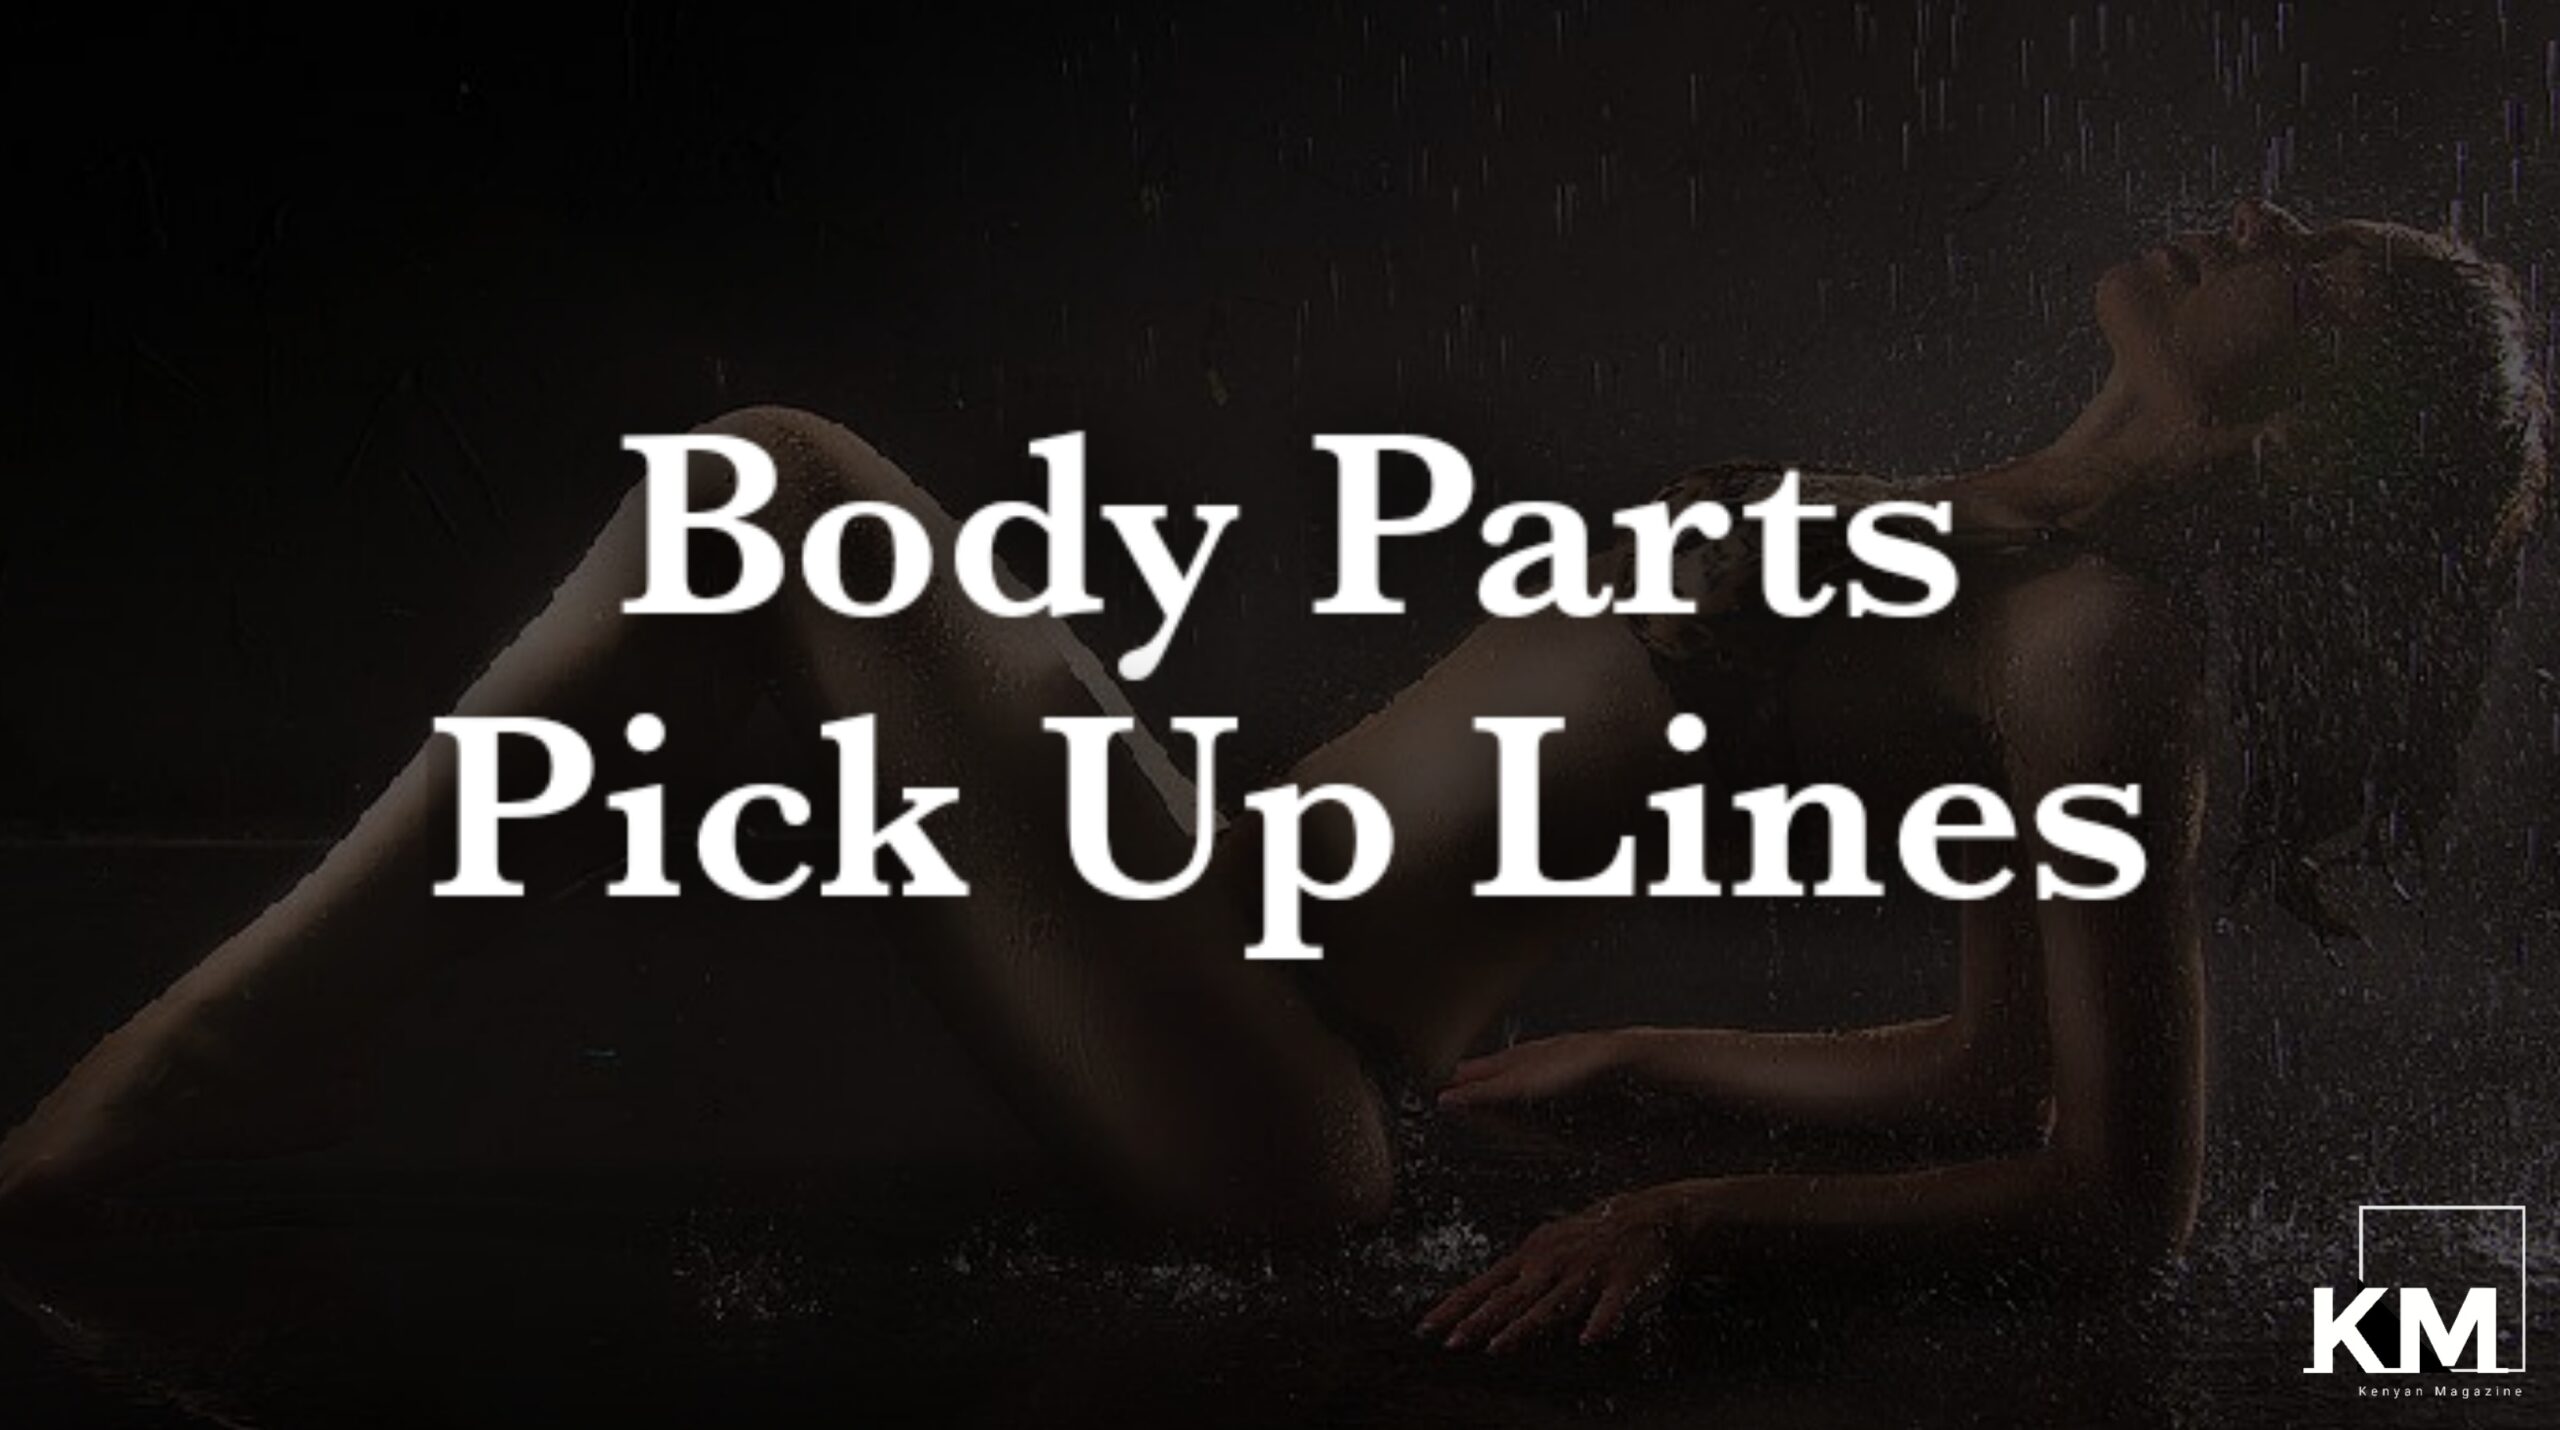 Body Parts Pick up lines